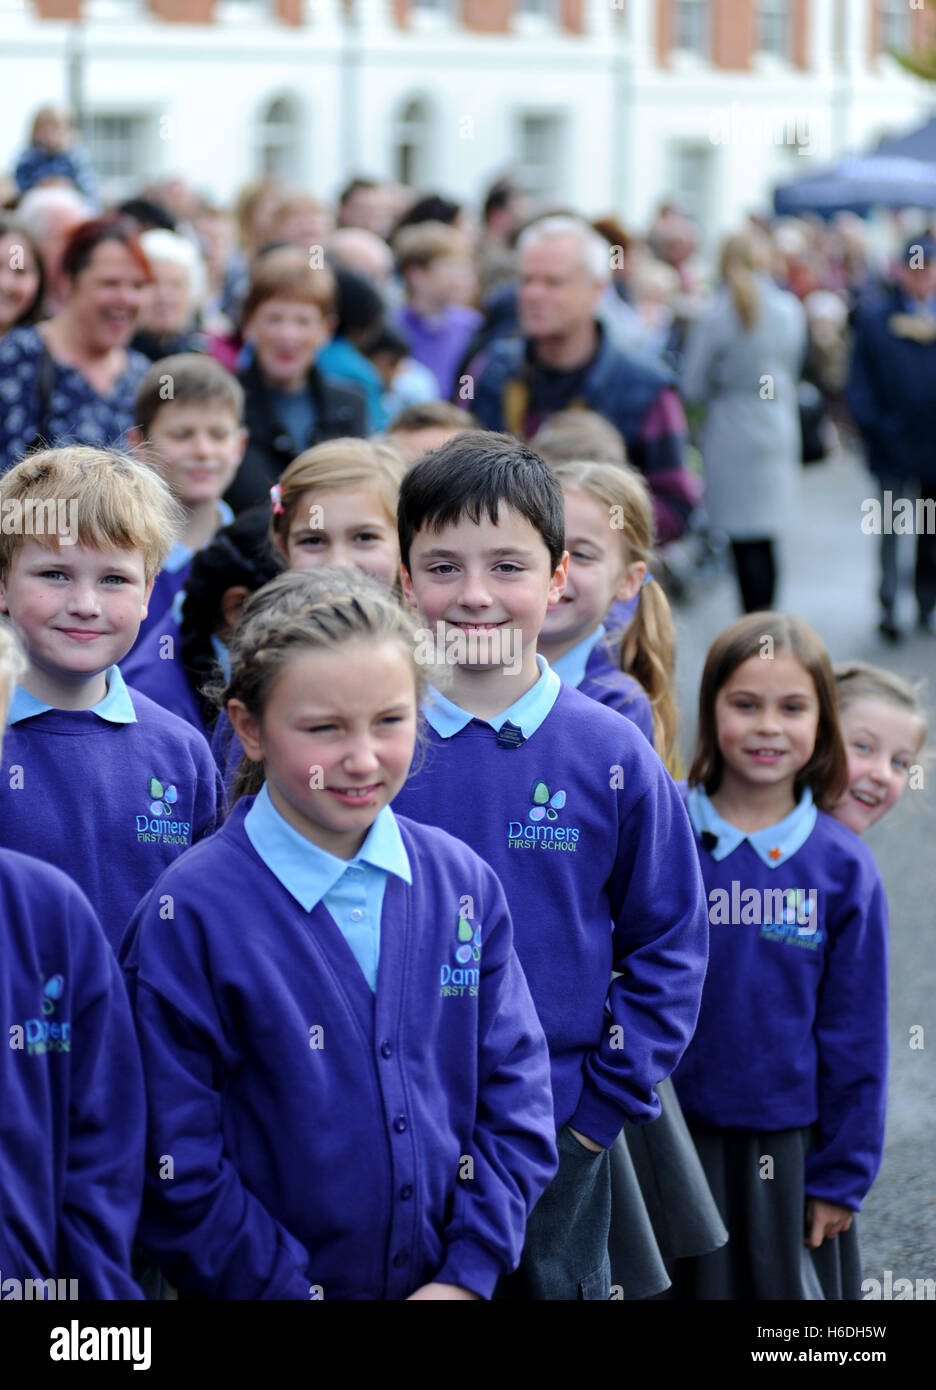 Dorchester, Dorset, UK. 27th Oct, 2016. Children from the new Damers First School await the arrival of the Queen. Queen Elizabeth II and Prince Philip, Duke of Edinburgh with Prince Charles, Prince of Wales attend the unveiling of a statue of Queen Elizabeth The Queen Mother during a visit to Poundbury. The 9'6' tall statue is the exact casting of the Queen Mother's statue standing in the Mall sculptured by Philip Jackson. Credit:  David Partridge / Alamy Live News Stock Photo